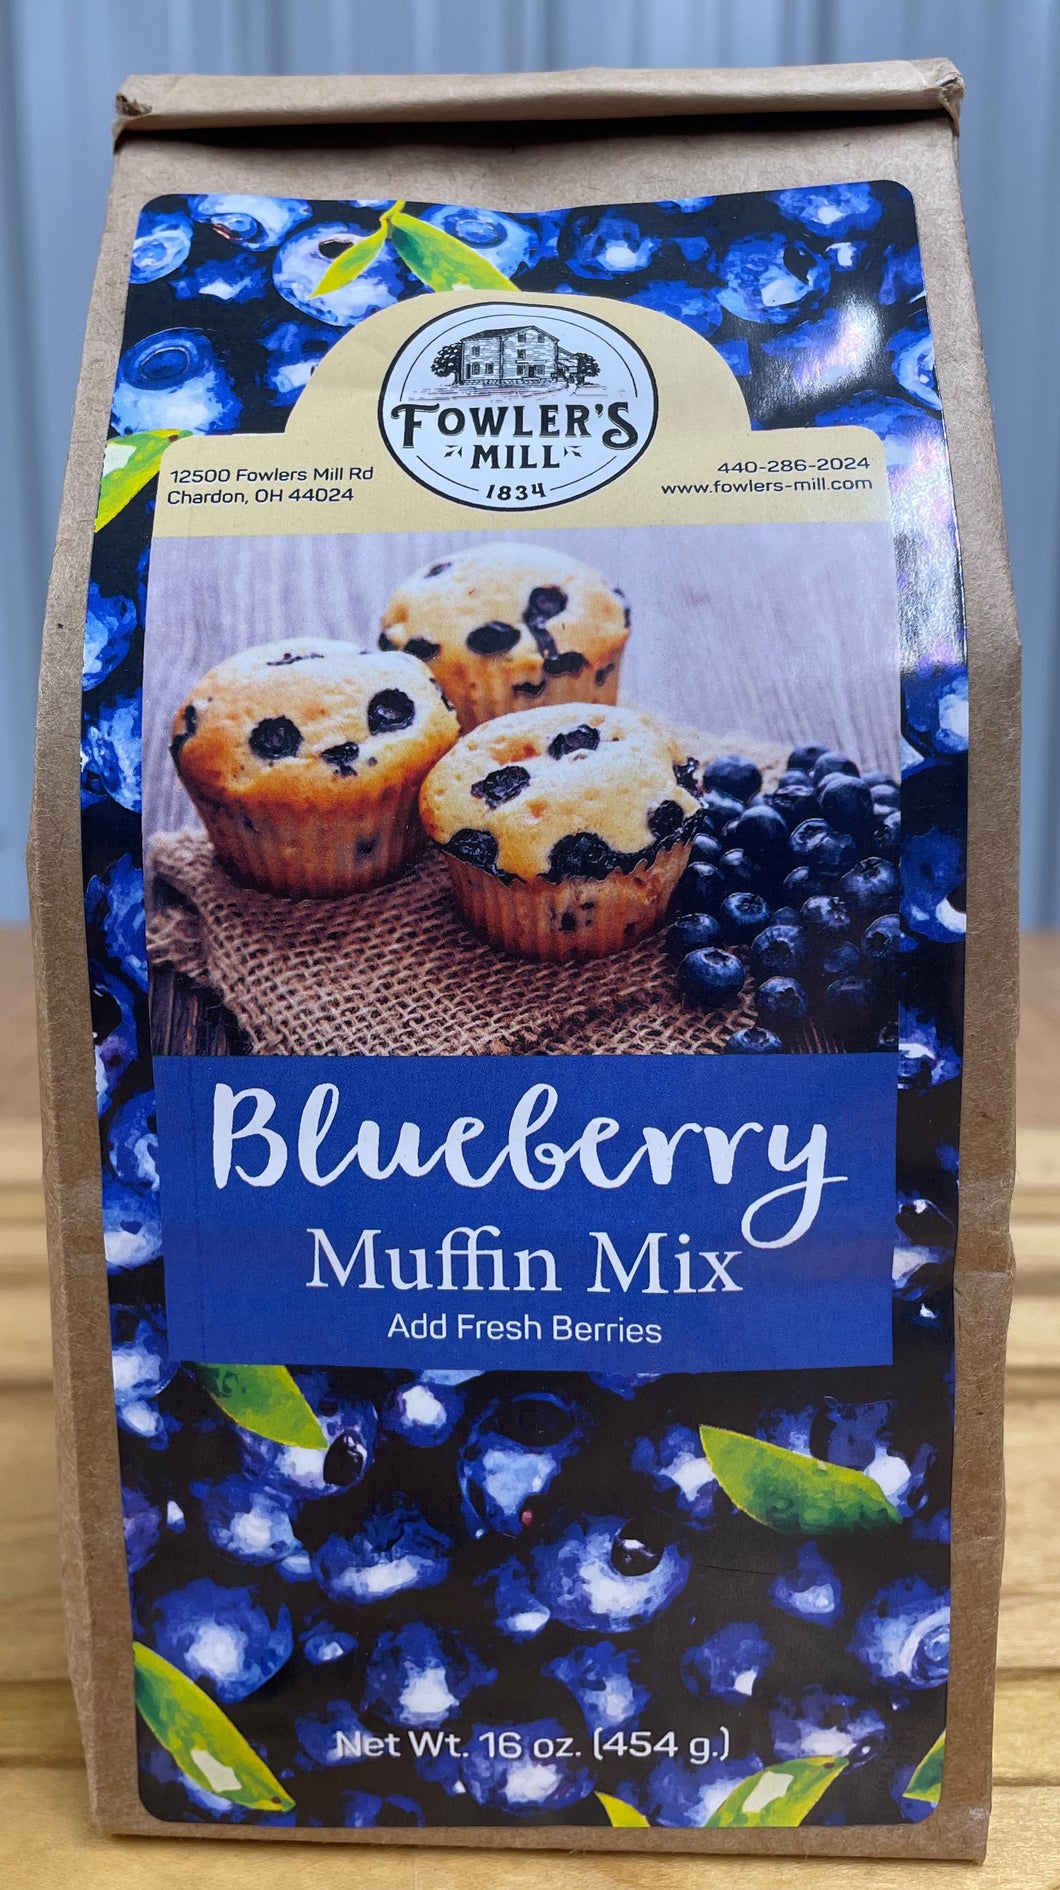 Fowler's Mill Blueberry Muffin Mix